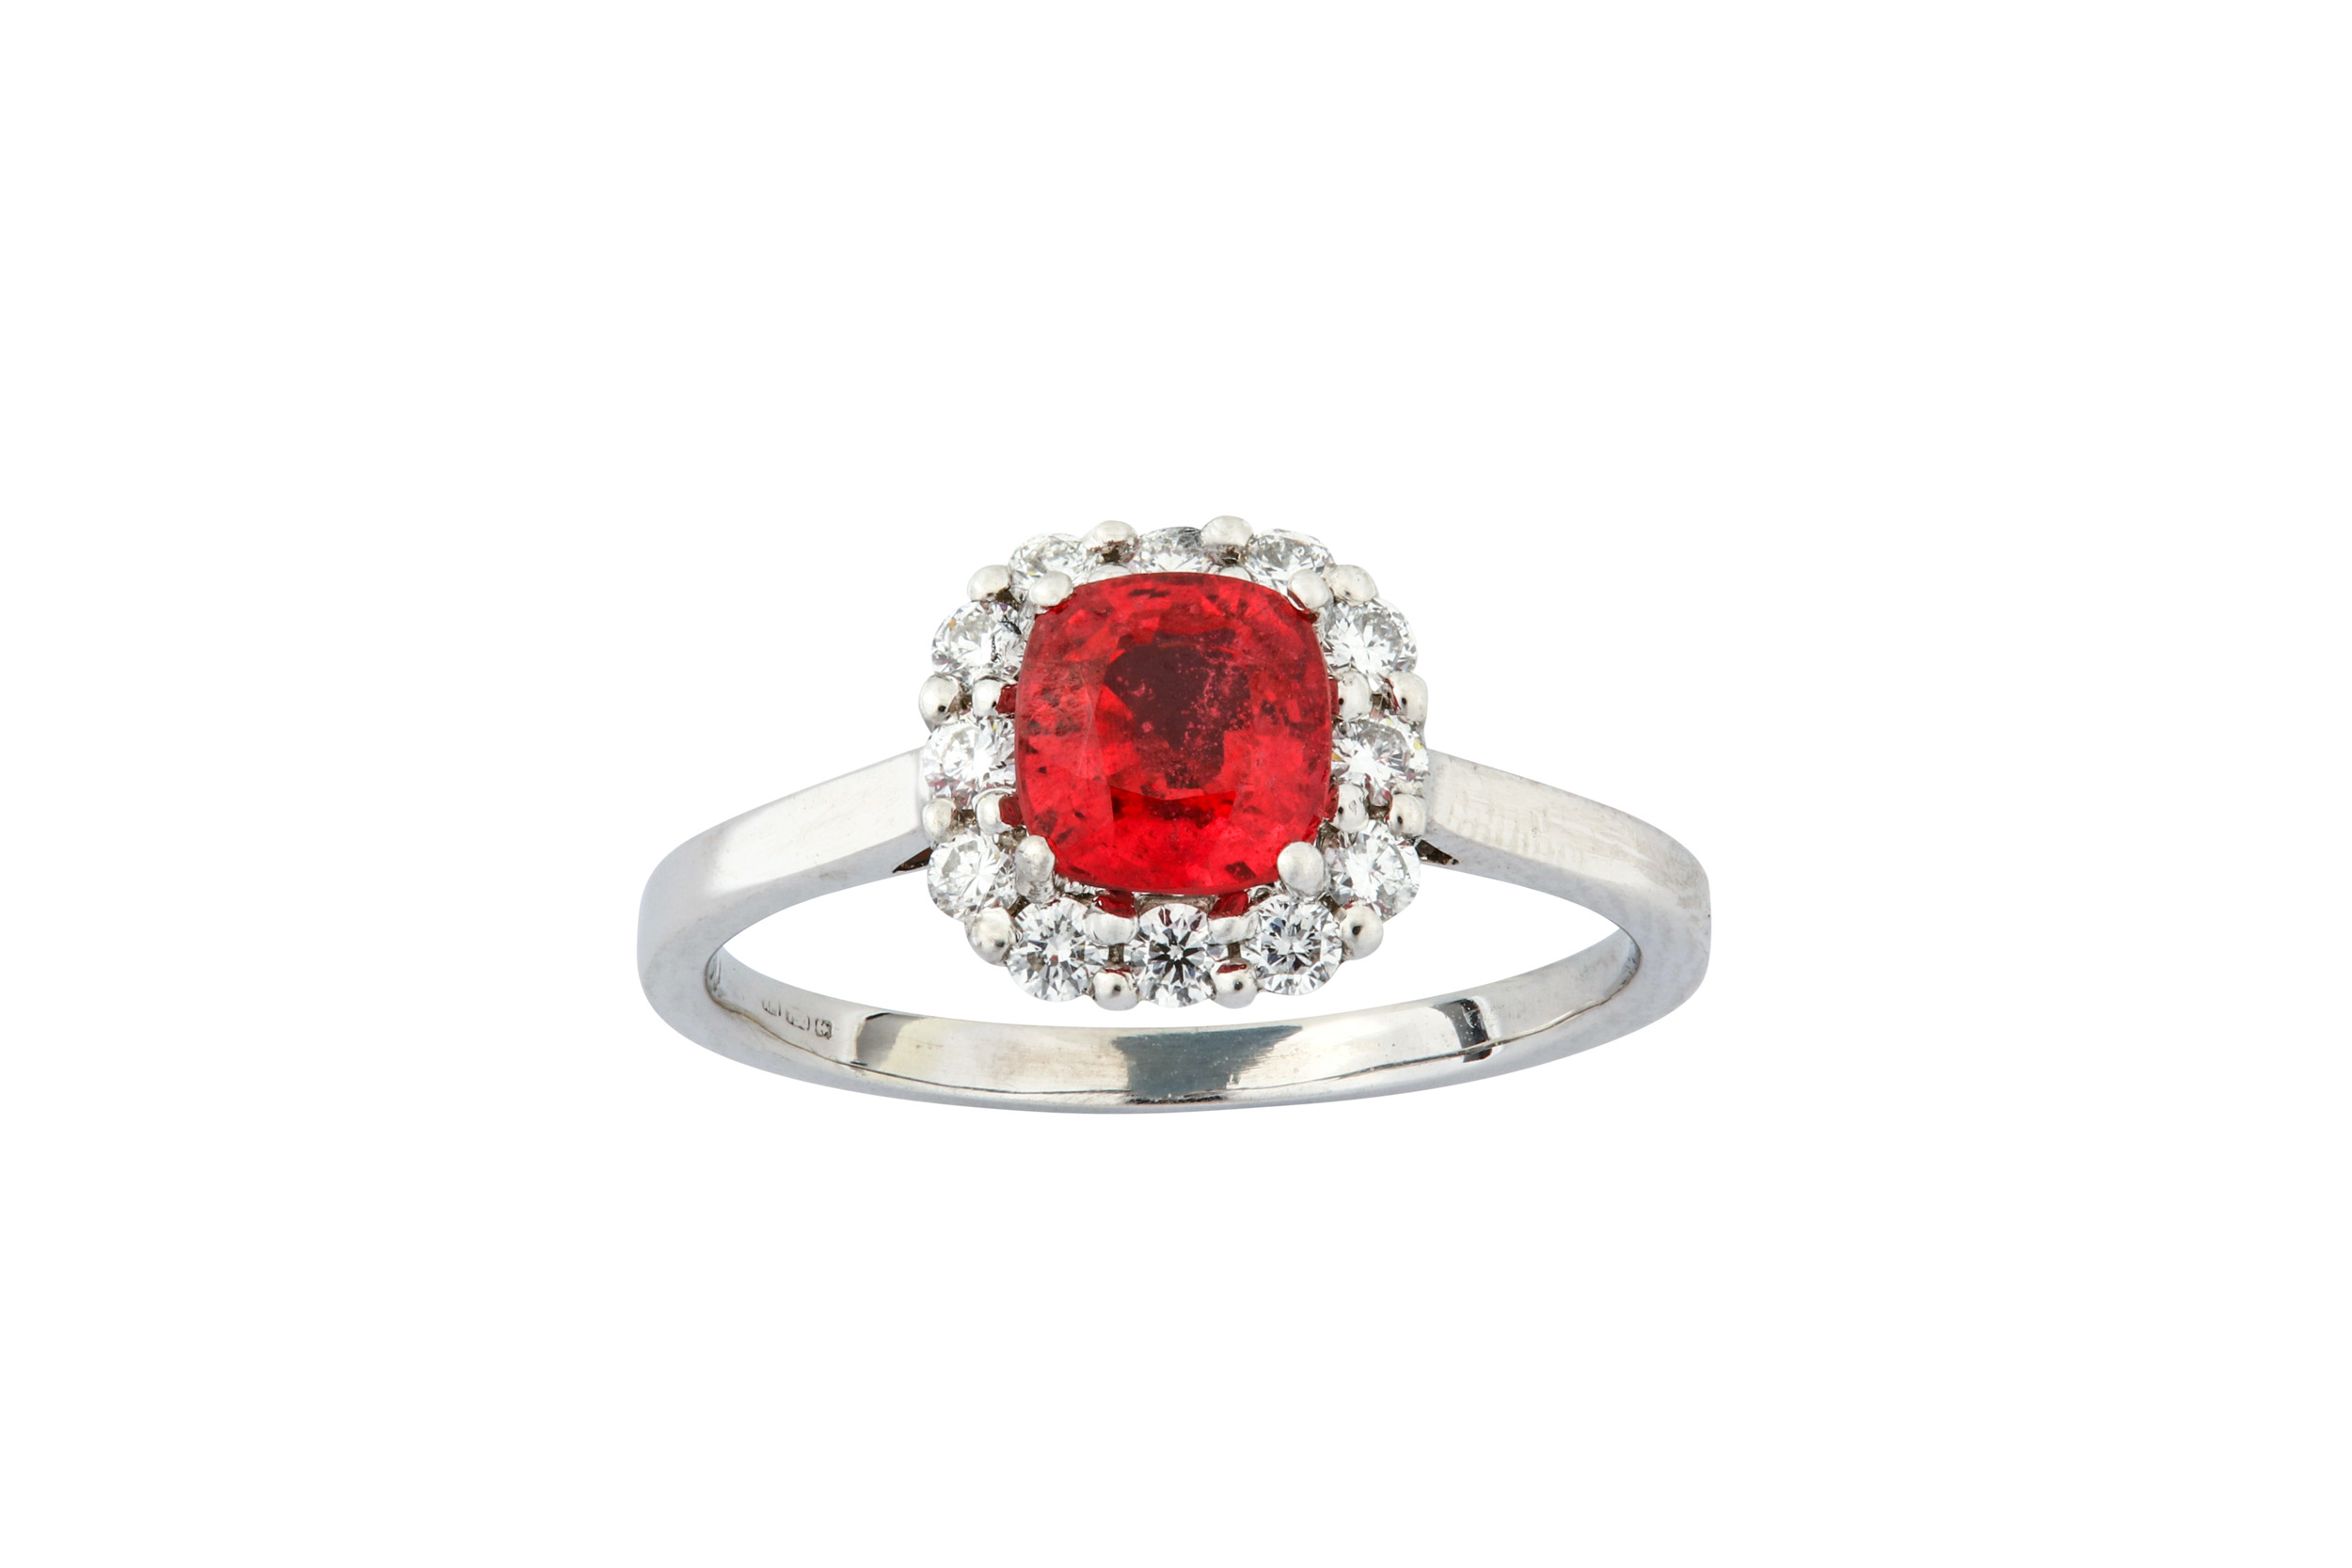 A red spinel and diamond cluster ring